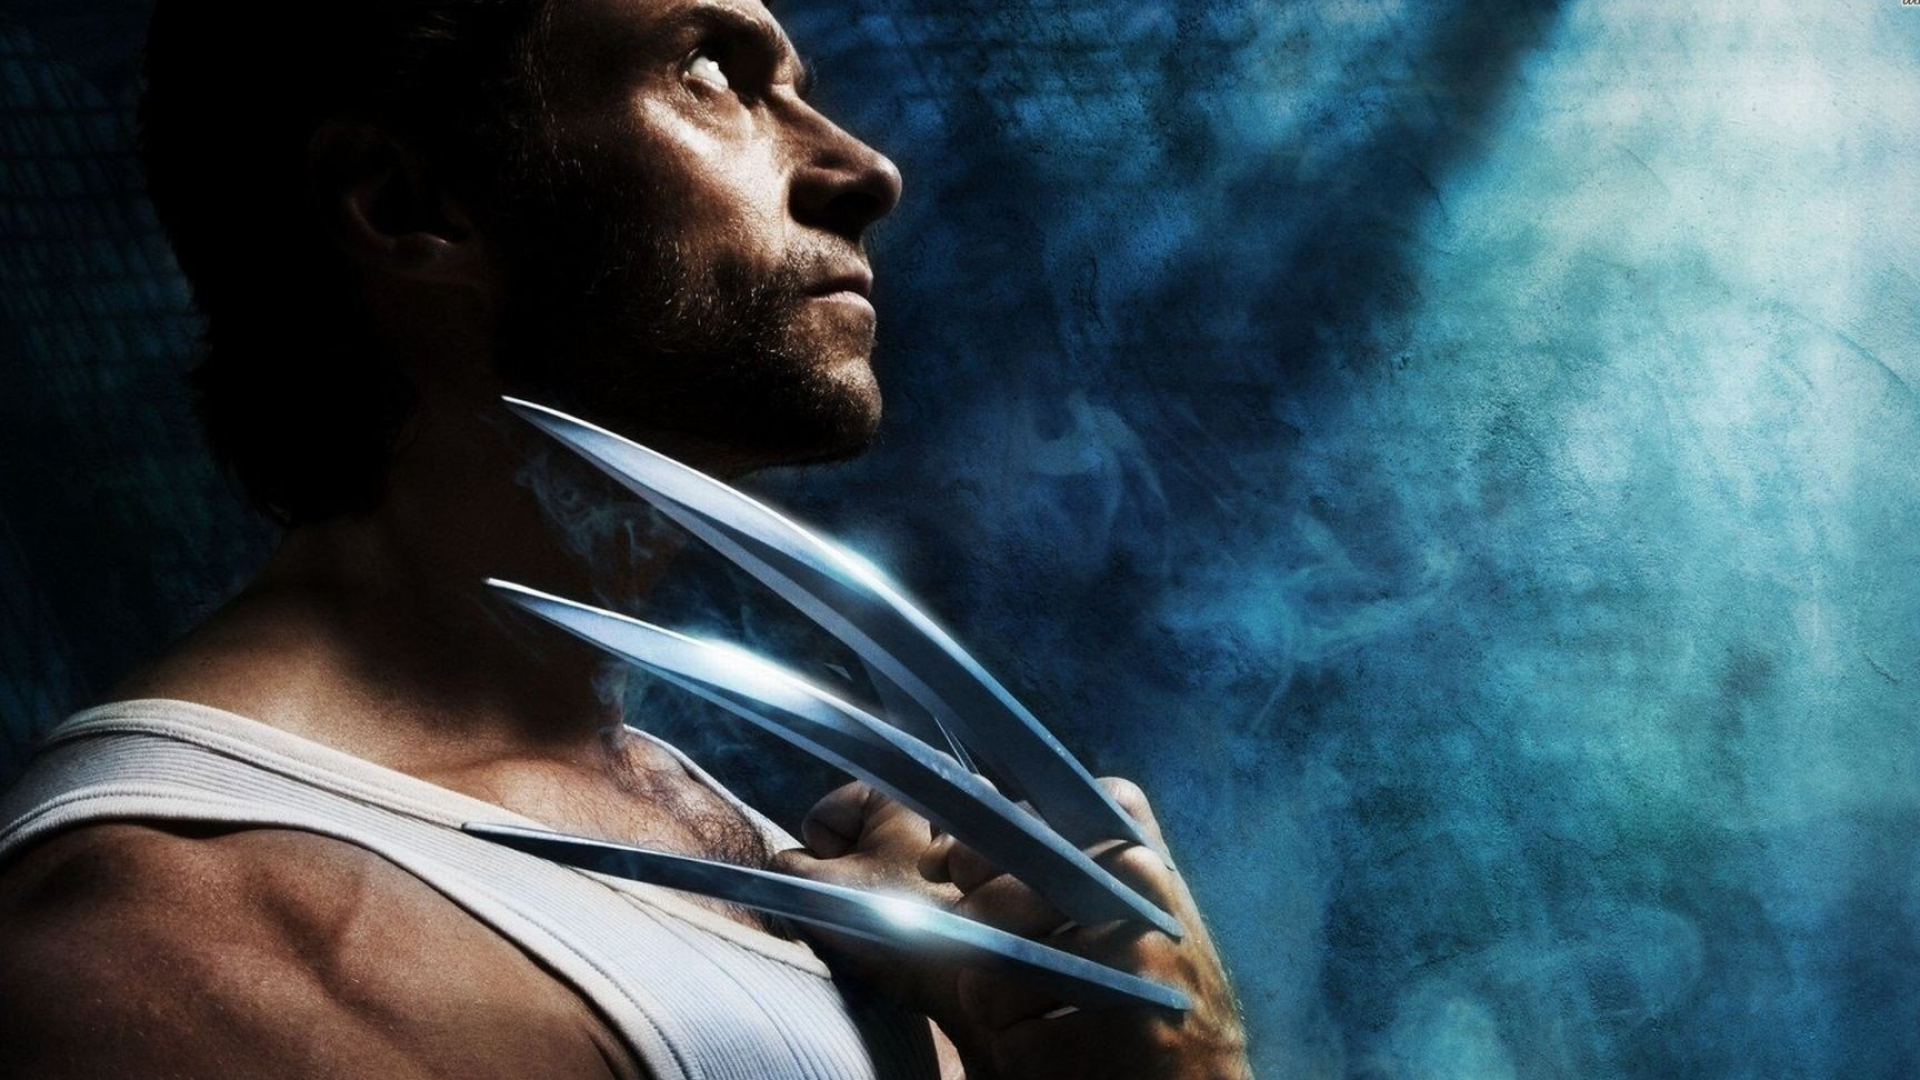 The Wolverine, Awesome, Free Wallpaper, Full HD, 1920x1080 Full HD Desktop